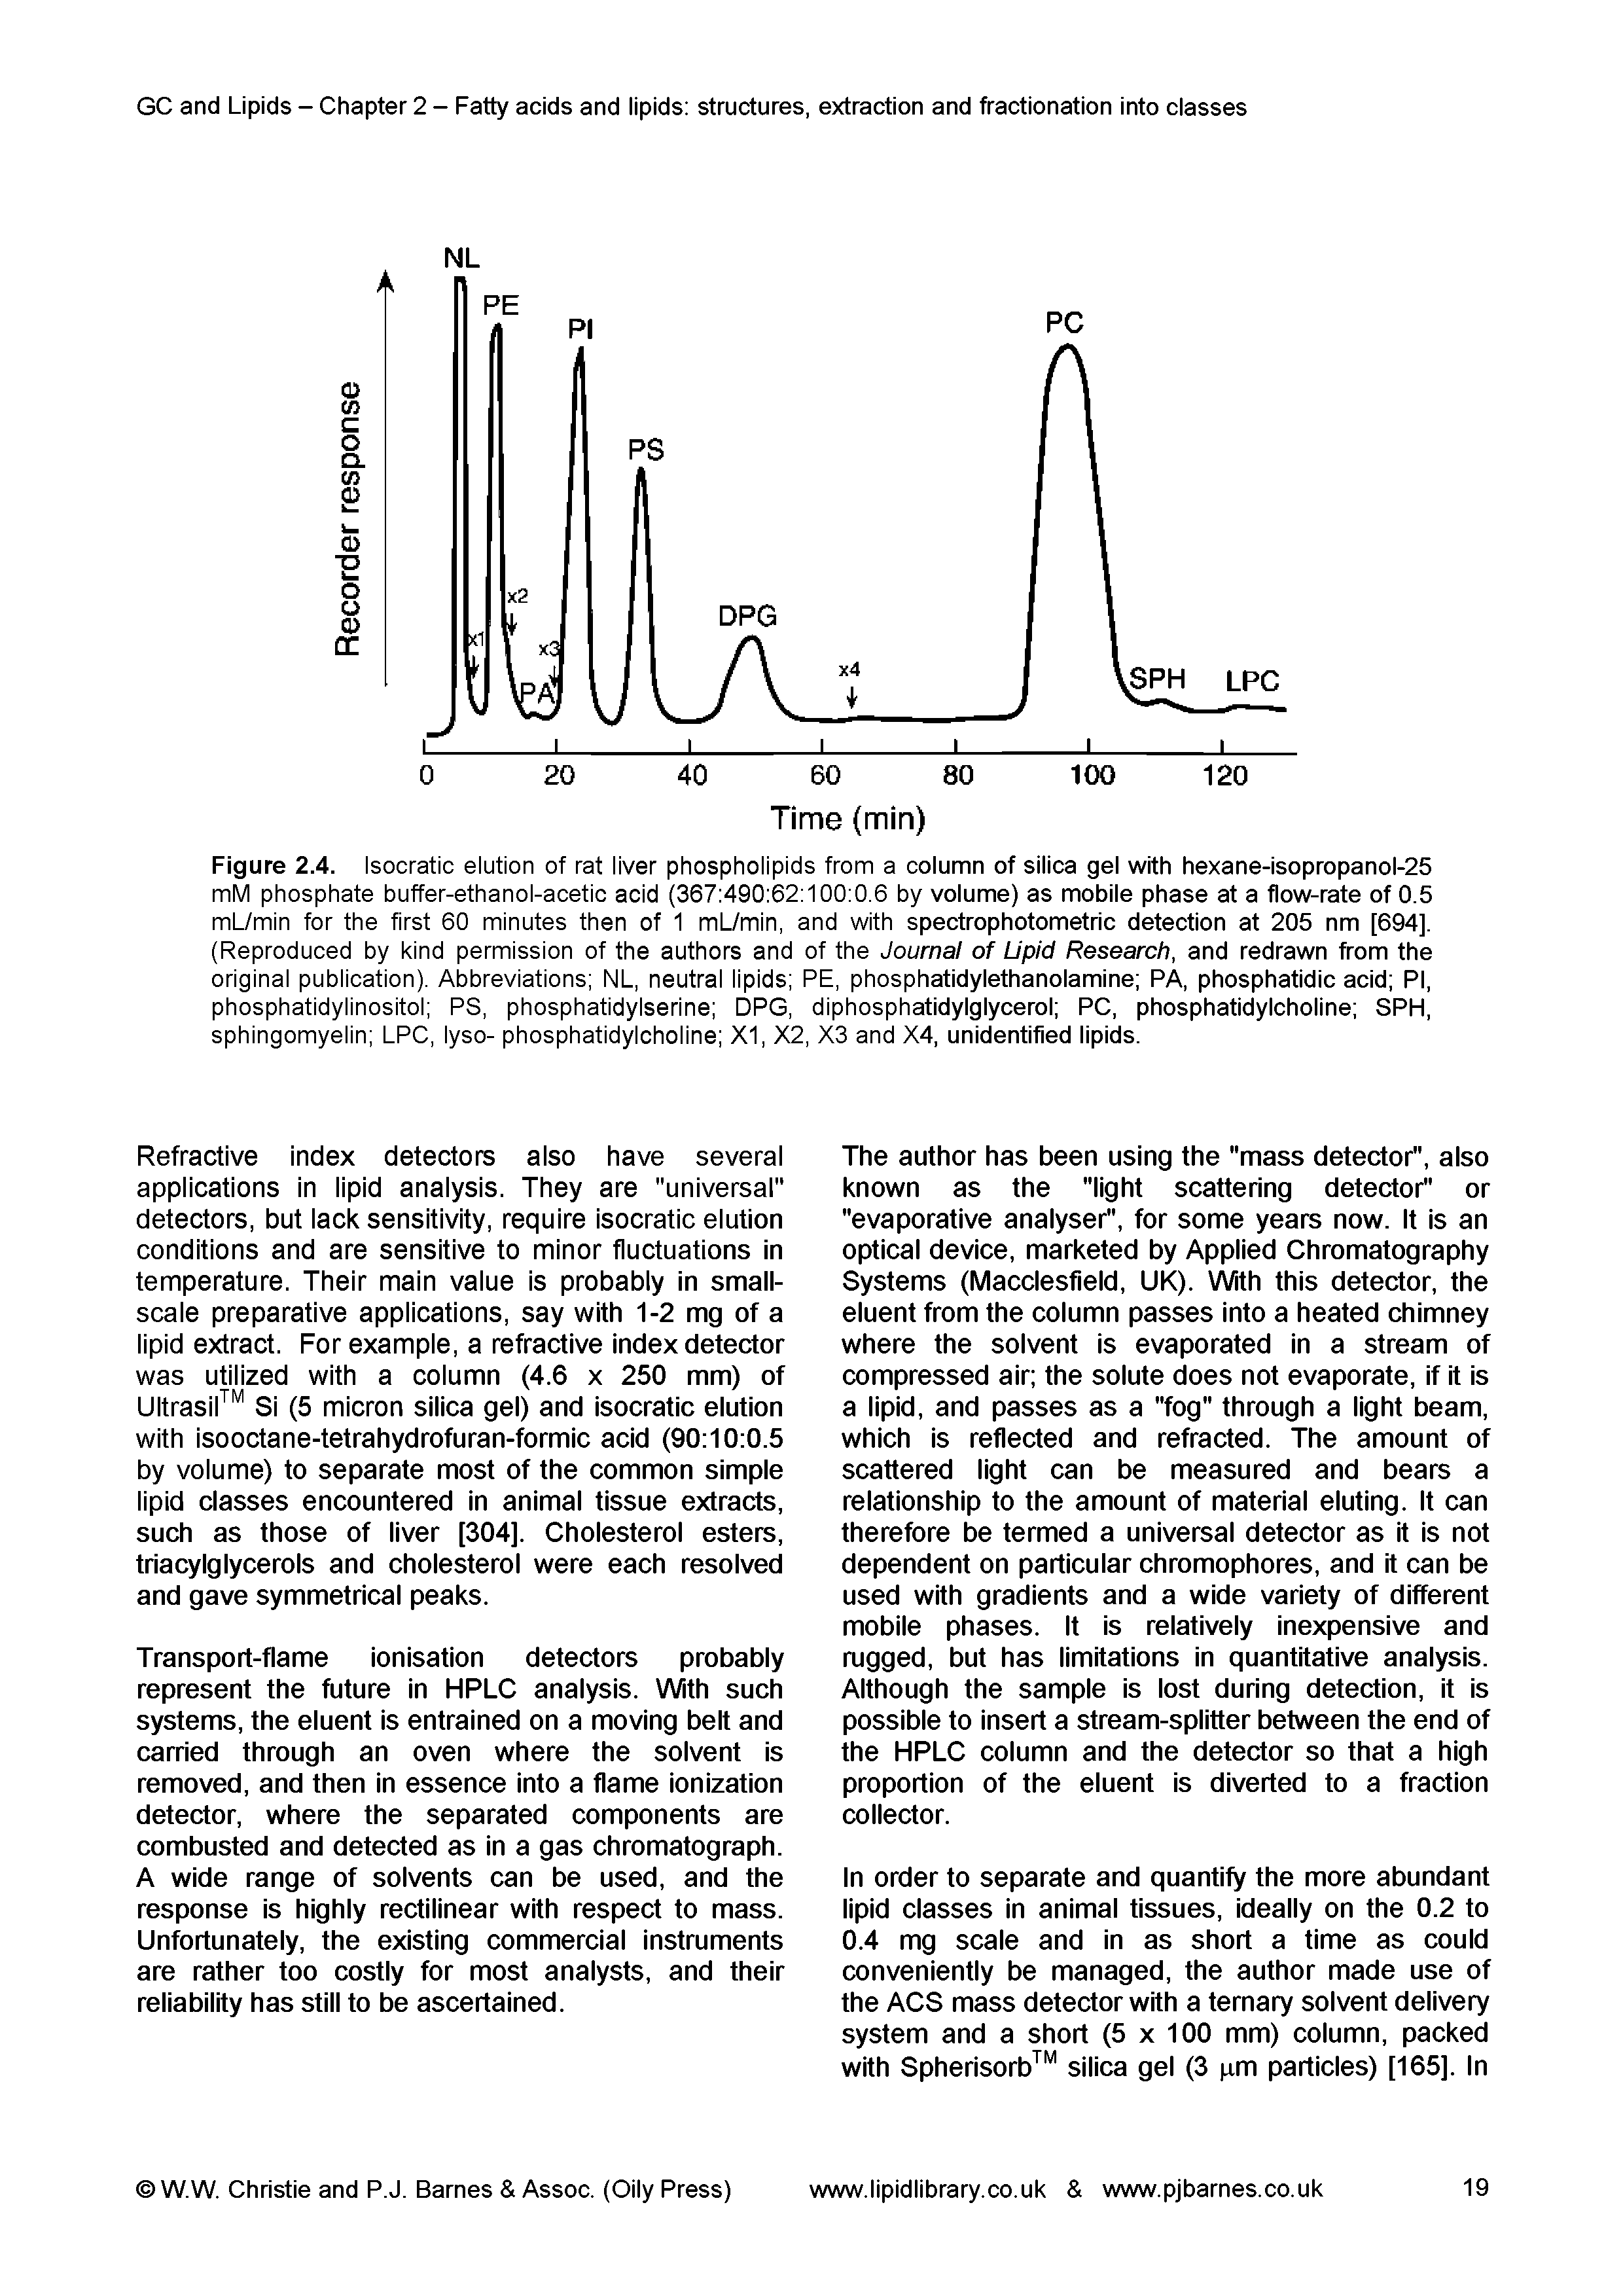 Figure 2.4. Isocratic elution of rat liver phospholipids from a column of silica gel with hexane-isopropanol-25 mM phosphate buffer-ethanol-acetic acid (367 490 62 100 0.6 by volume) as mobile phase at a flow-rate of 0.5 mL/min for the first 60 minutes then of 1 mL/min, and with spectrophotometric detection at 205 nm [694]. (Reproduced by kind permission of the authors and of the Journal of Lipid Research, and redrawn from the original publication). Abbreviations NL, neutral lipids PE, phosphatidylethanolamine PA, phosphatidic acid PI, phosphatidylinositol PS, phosphatidylserine DPG, diphosphatidylglycerol PC, phosphatidylcholine SPH, sphingomyelin LPC, lyso- phosphatidylcholine XI, X2, X3 and X4, unidentified lipids.